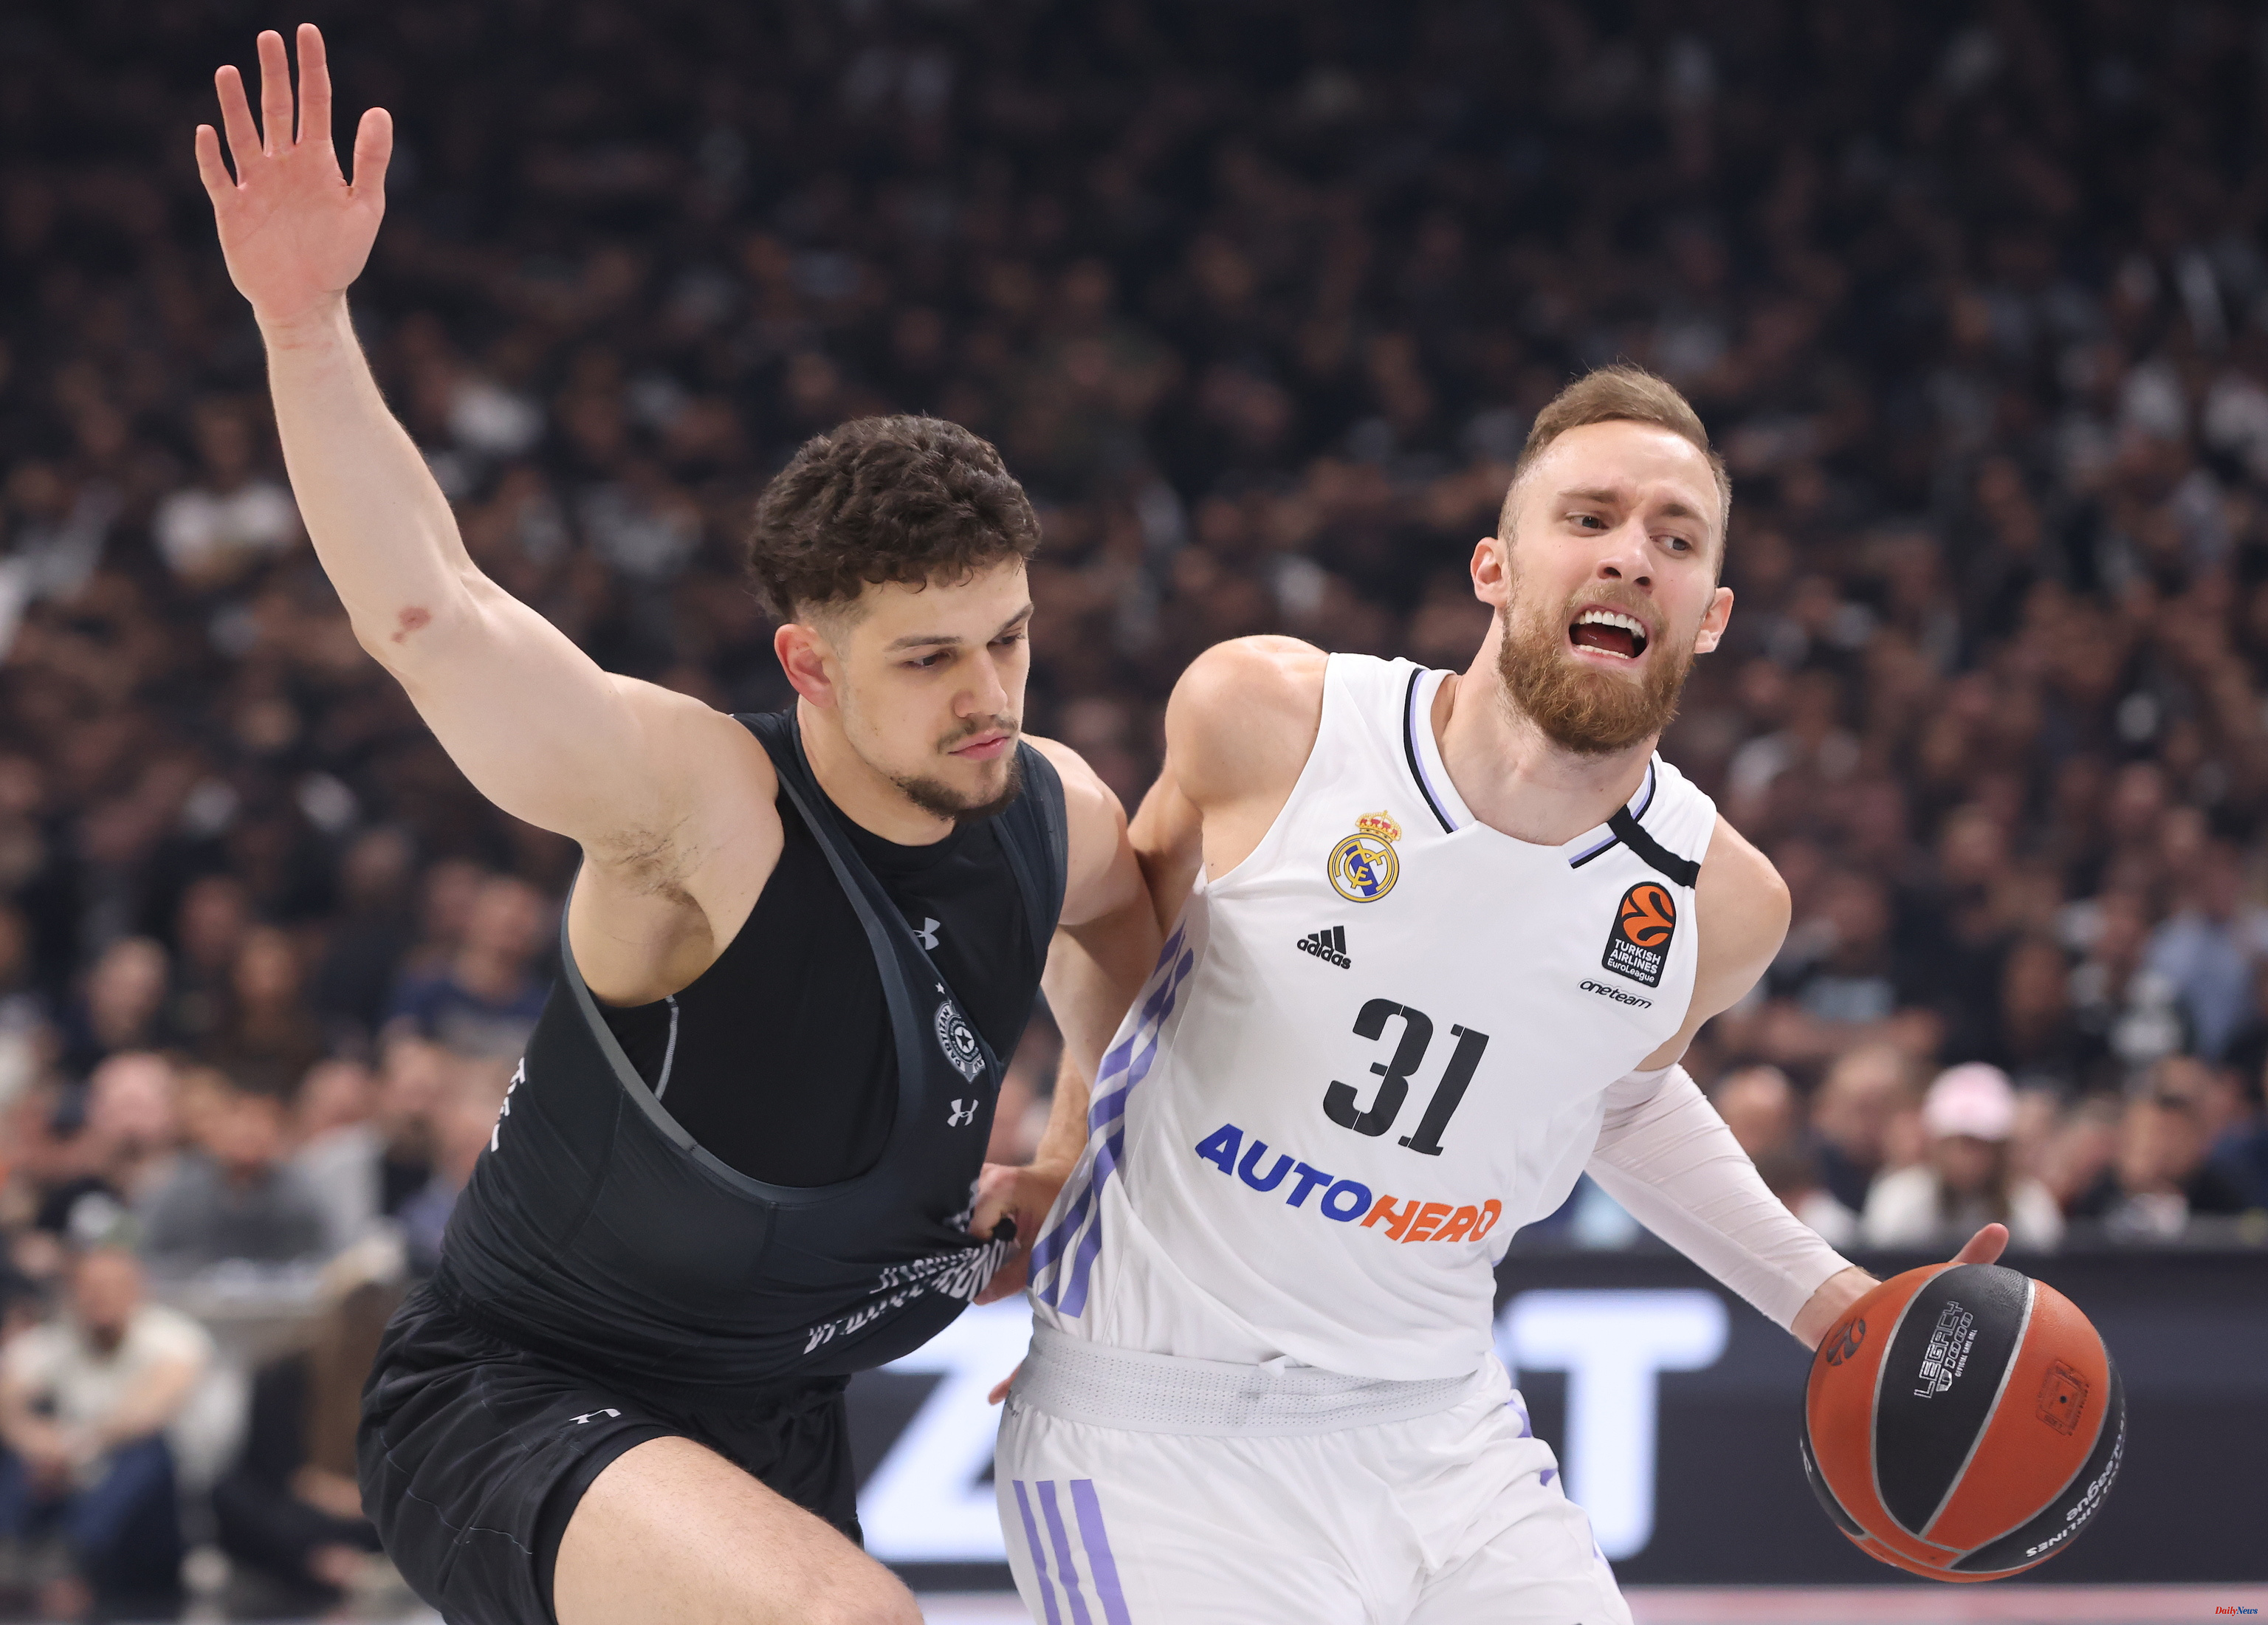 Basketball Real Madrid - Partizan: Schedule and where to watch the Euroleague game on TV and online